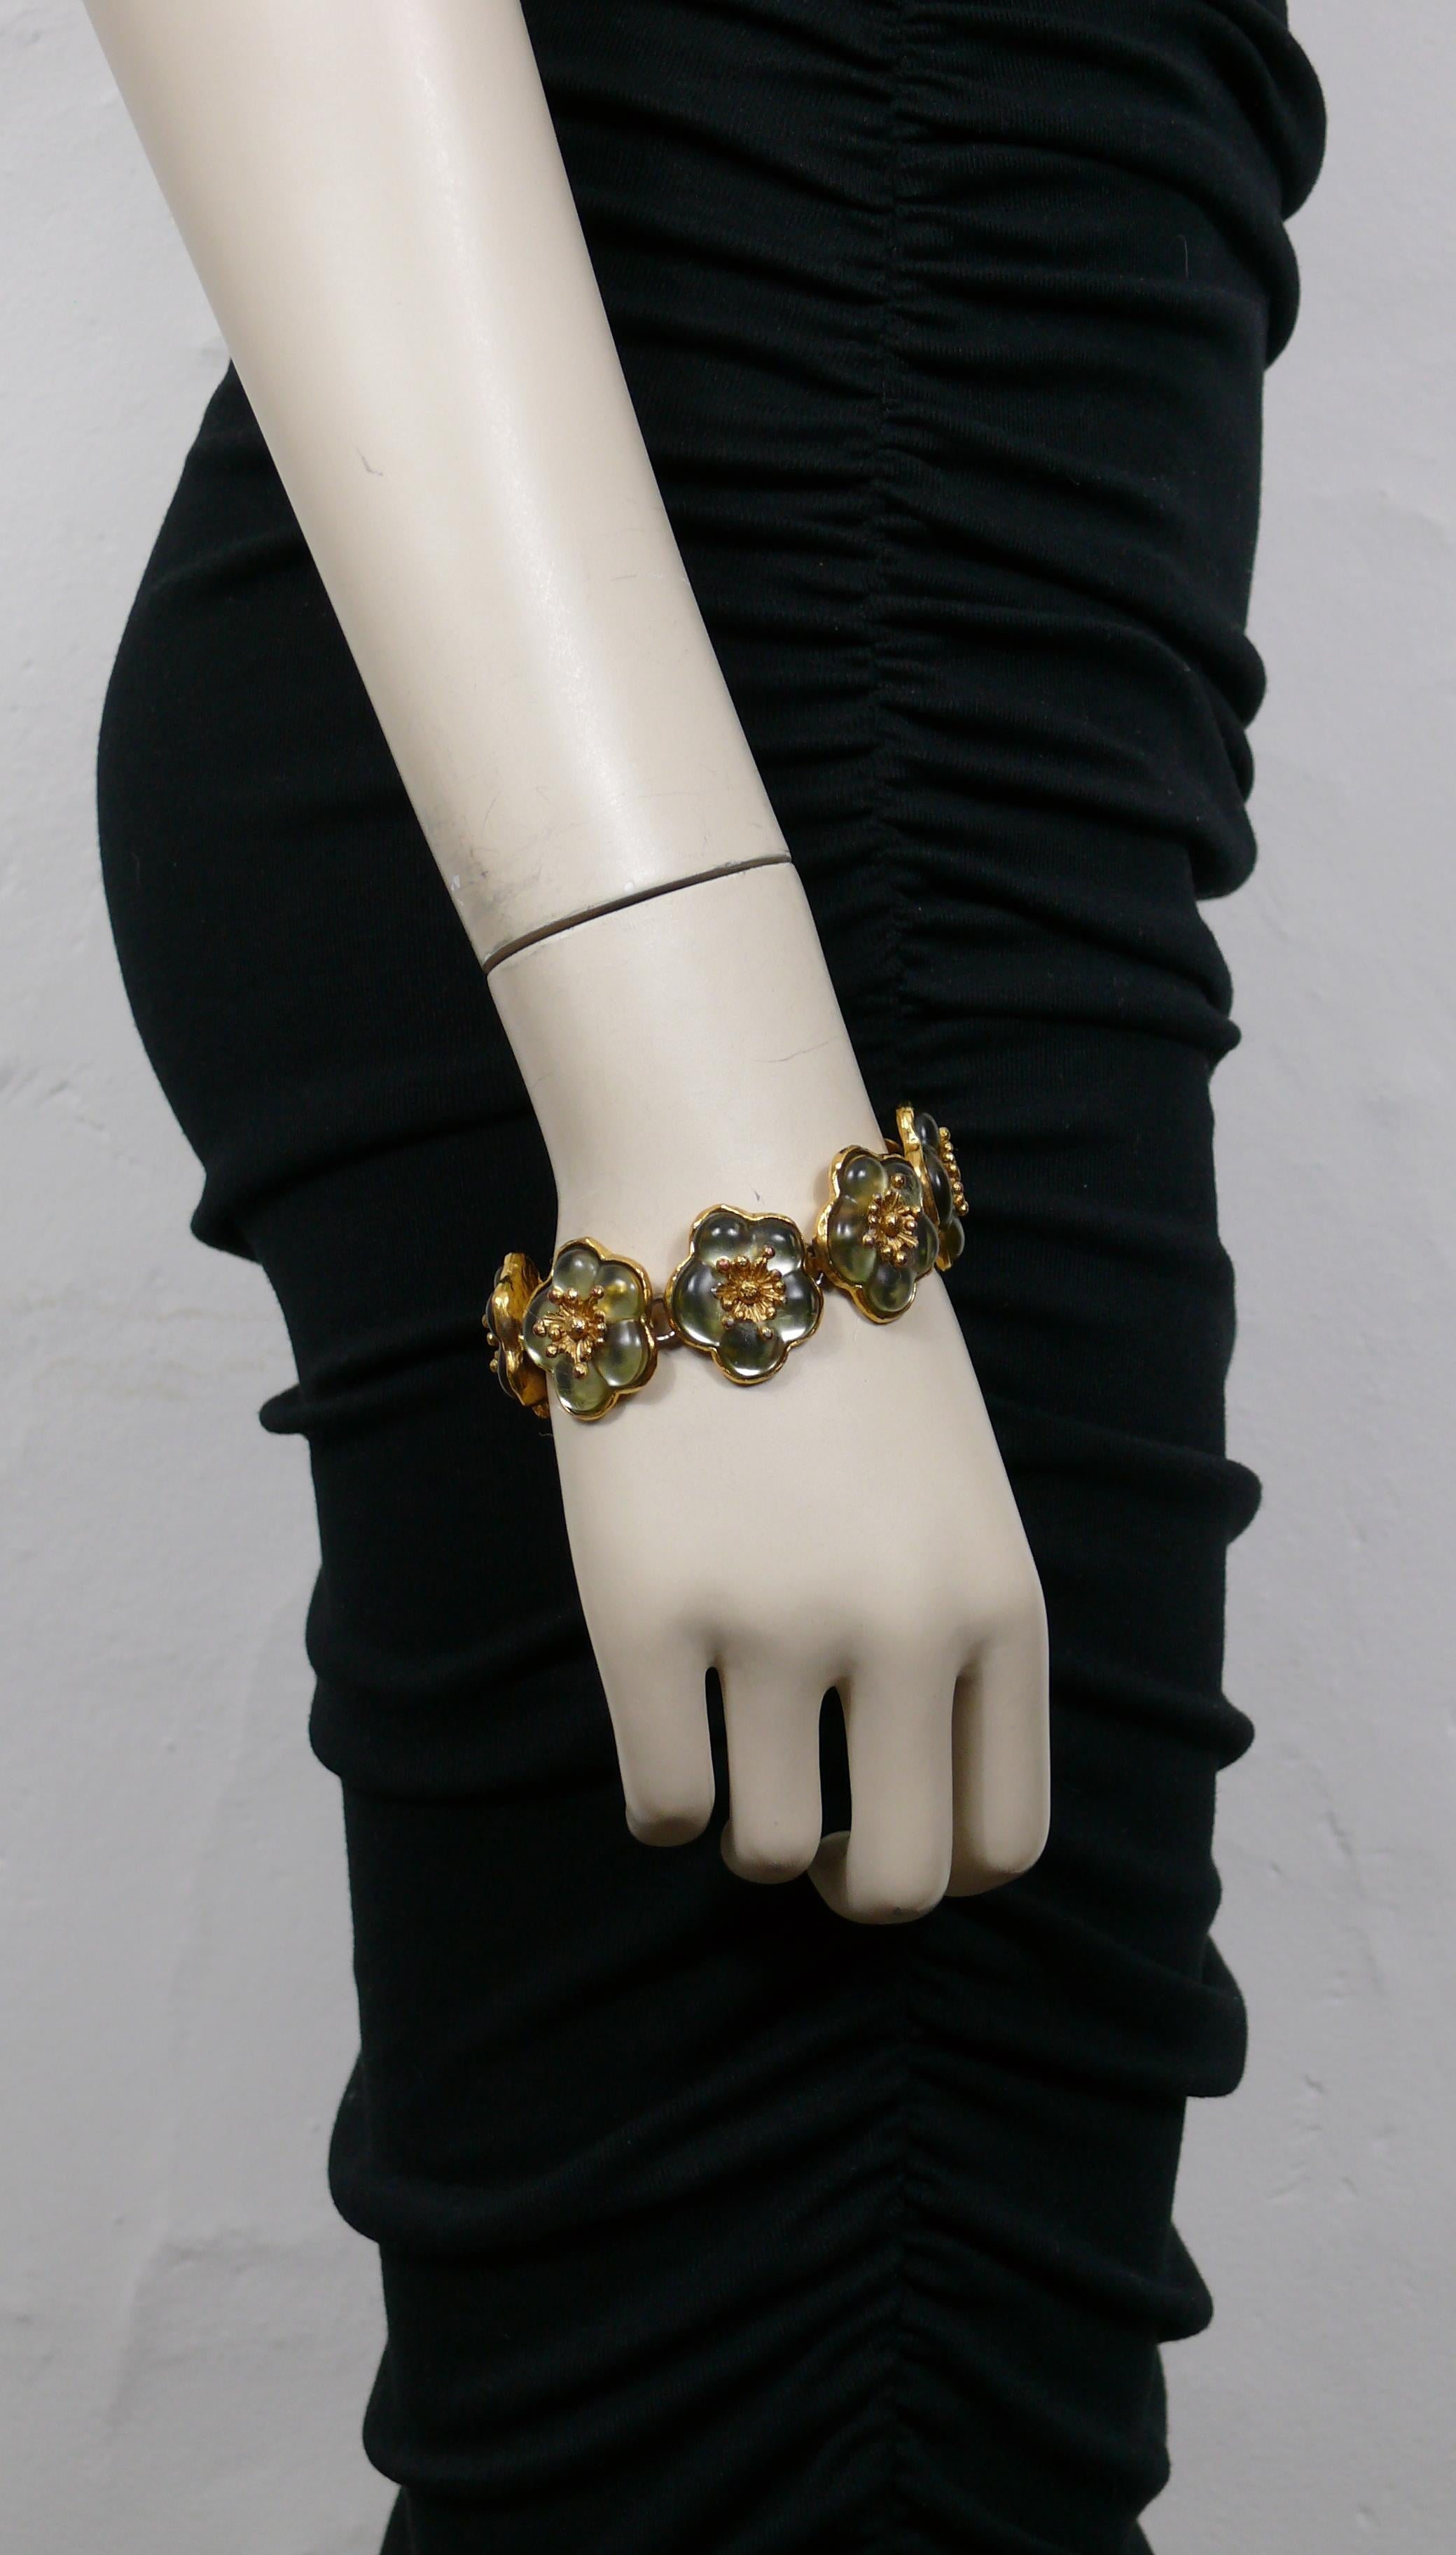 KENZO vintage gold tone floral links bracelet featuring resin cherry blossoms with spiky metal bud at the centre.

Toggle and loop closure.

Embossed KENZO PARIS Made in France.
Embossed KENZO on the toggle.

Indicative measurements : length approx.